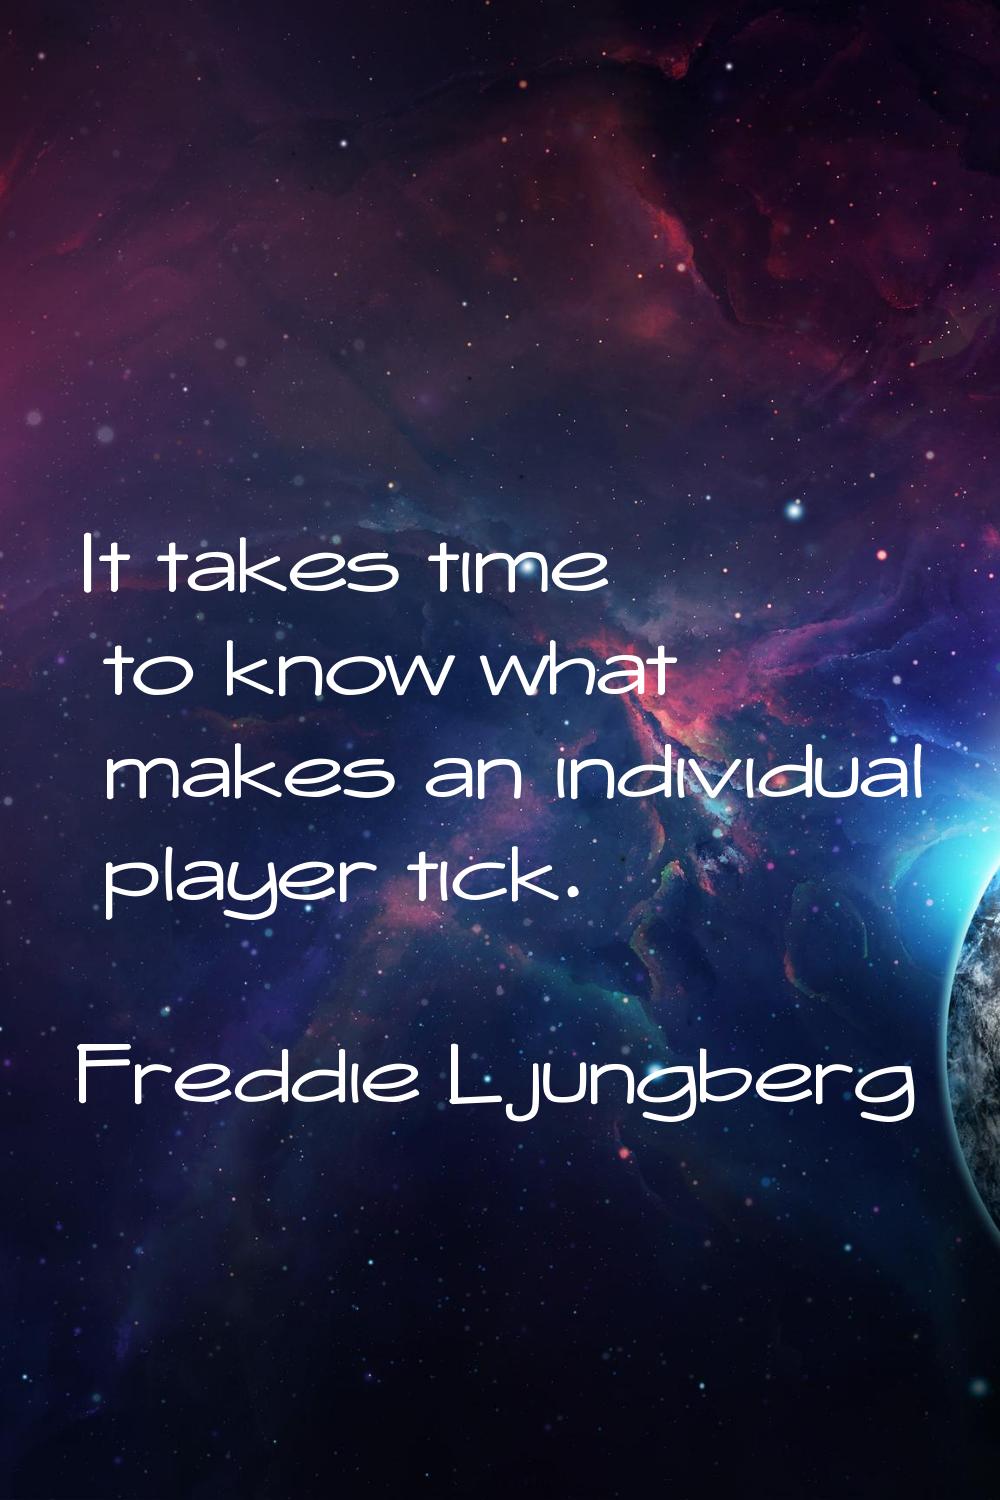 It takes time to know what makes an individual player tick.